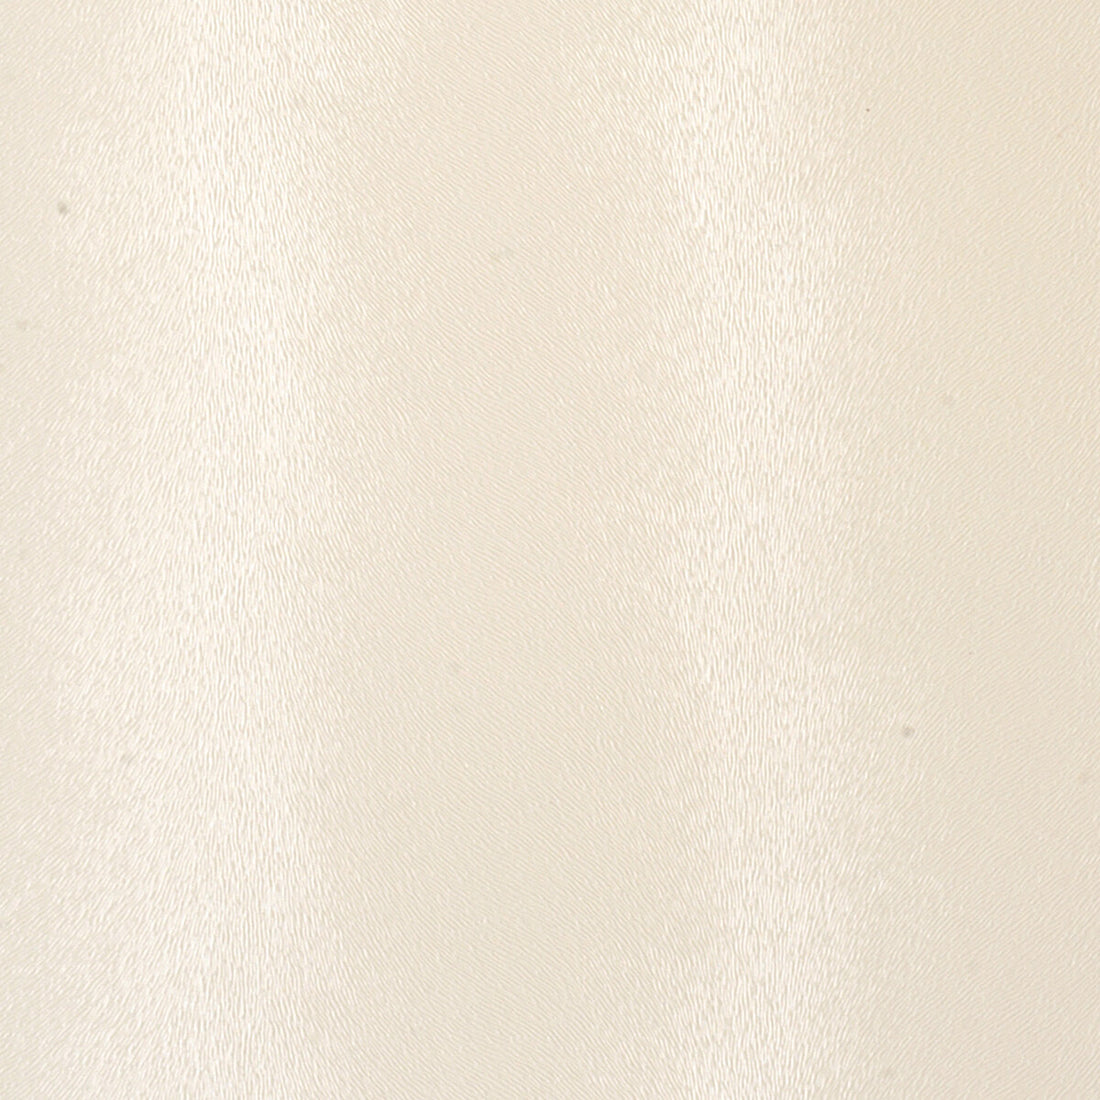 Brina fabric in alabaster color - pattern BRINA.101.0 - by Kravet Contract in the Contract Sta-Kleen collection